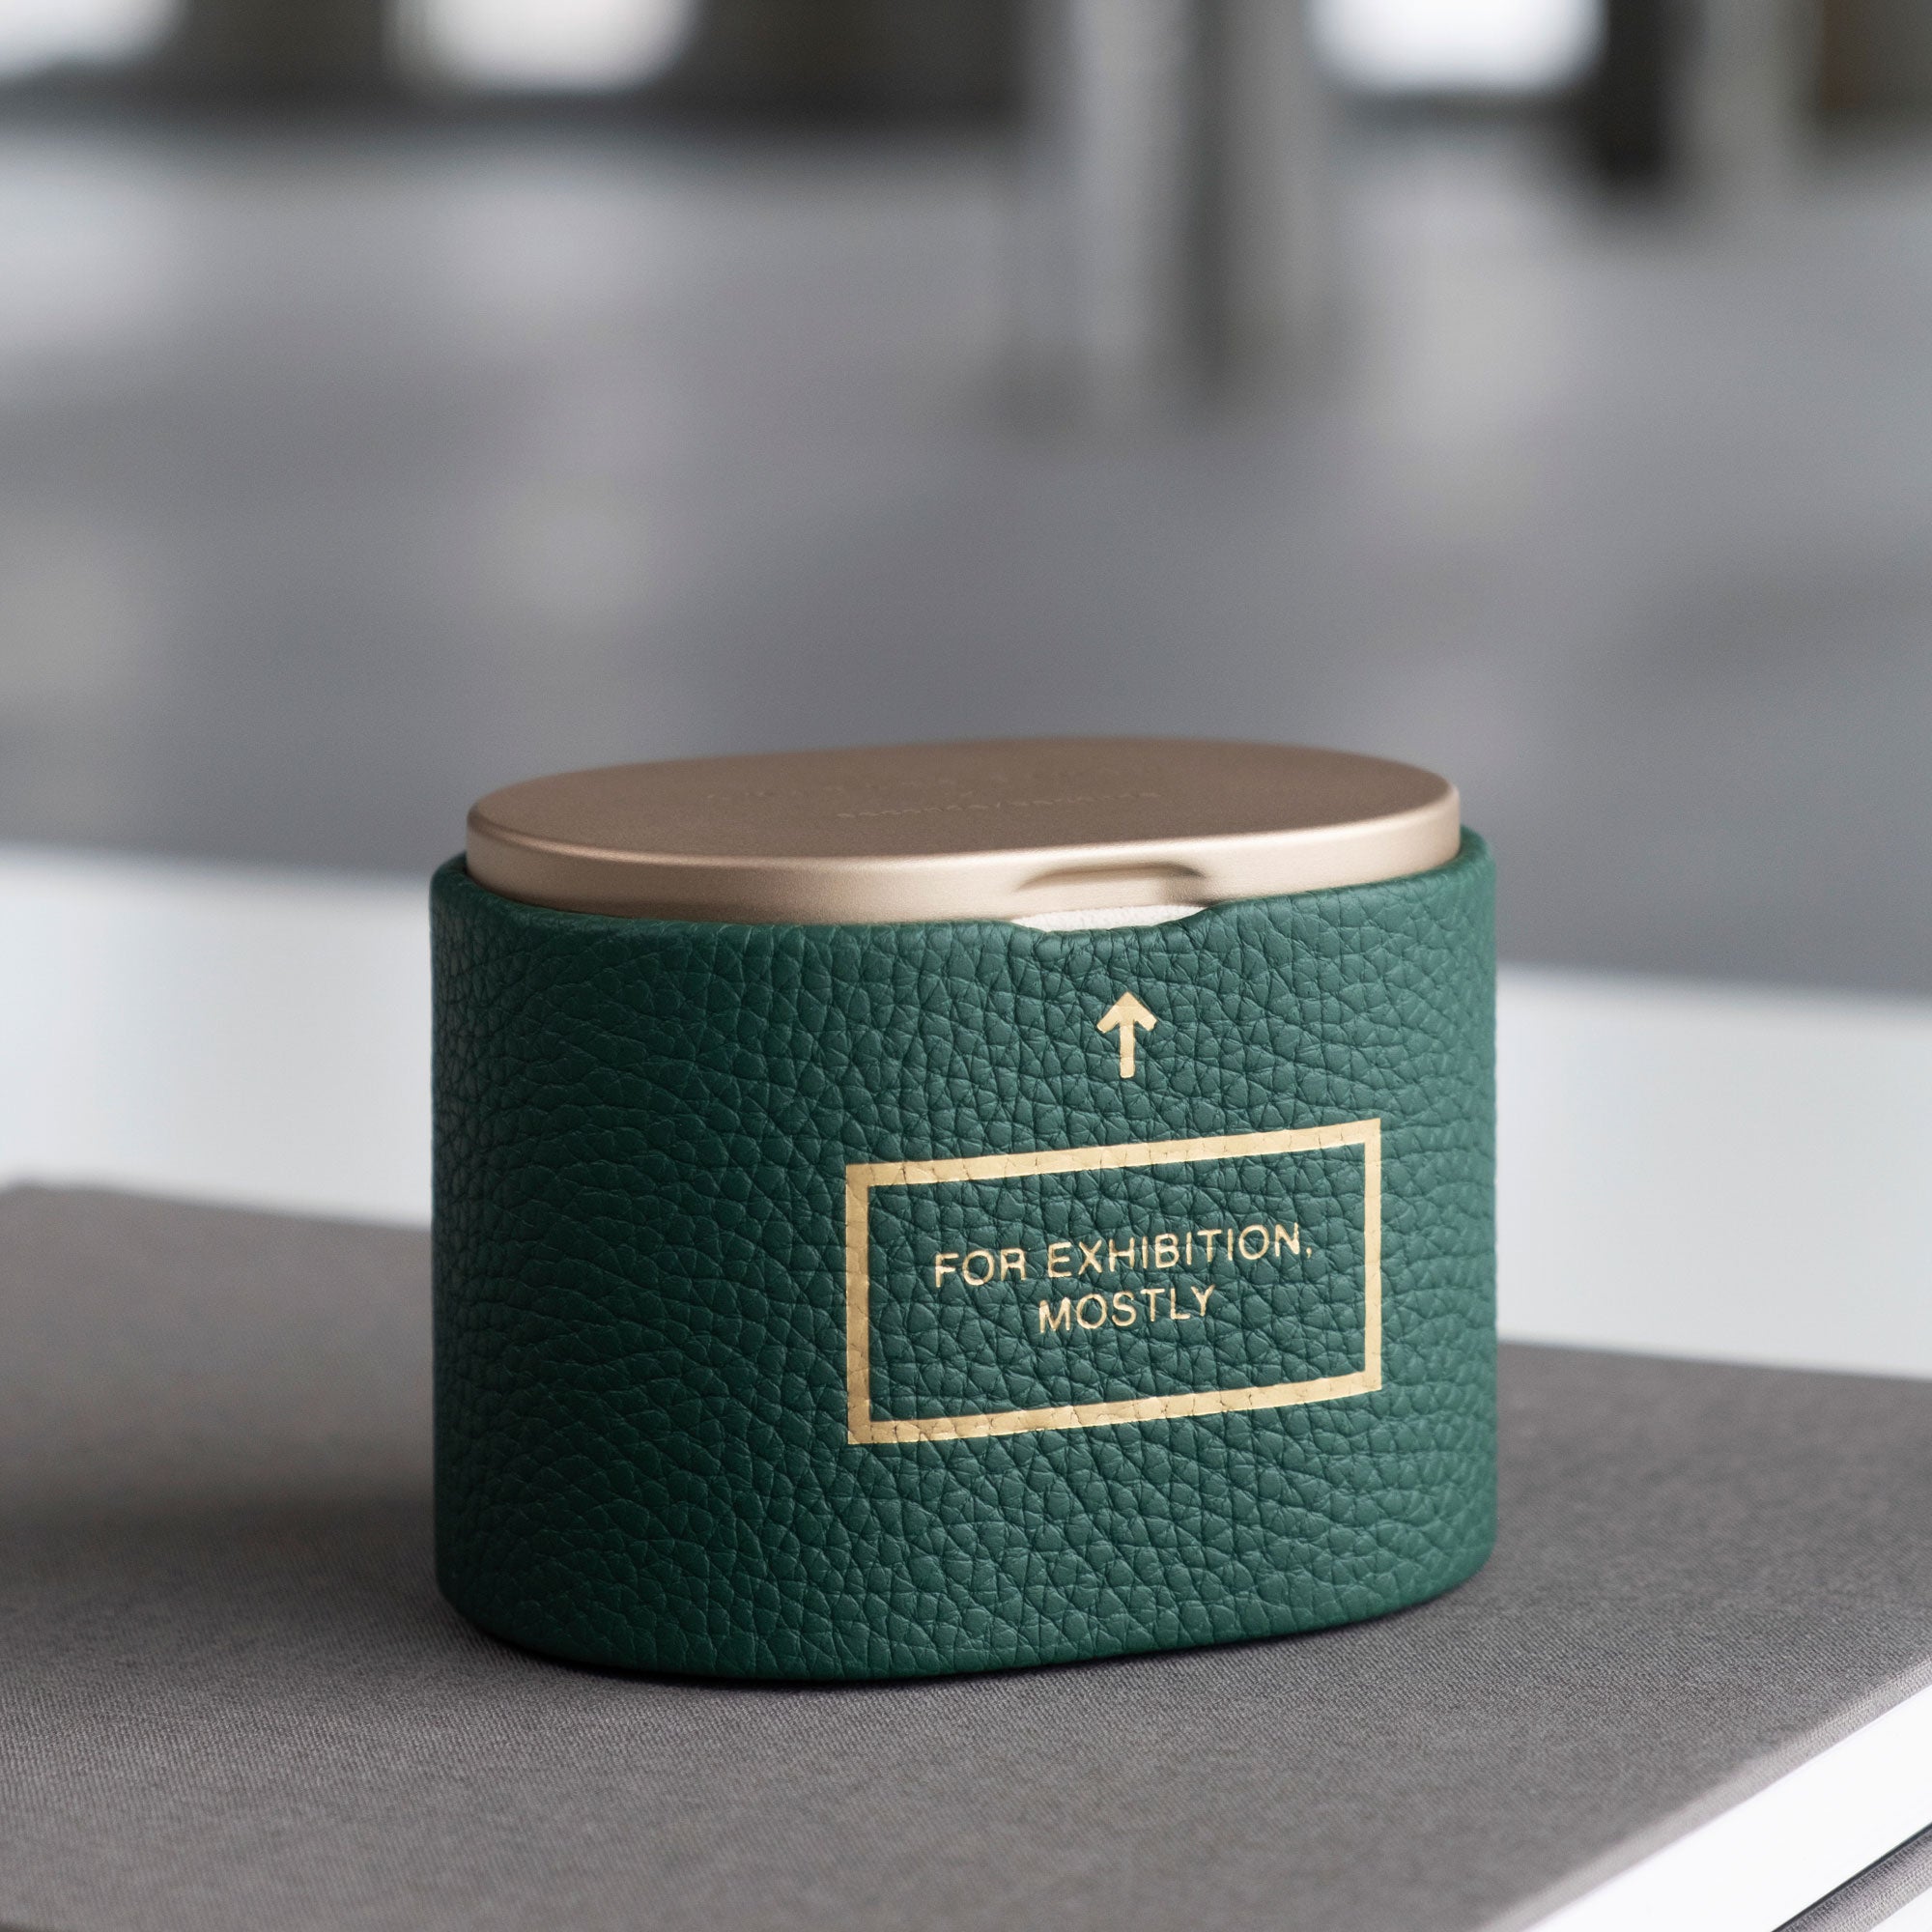 Charles Simon x seconde/ seconde/ limited edition watch roll for one watch. A tongue-in-cheek homage to Rolex's exhibition only watches. Handmade from emerald leather and champagne anodized aluminum